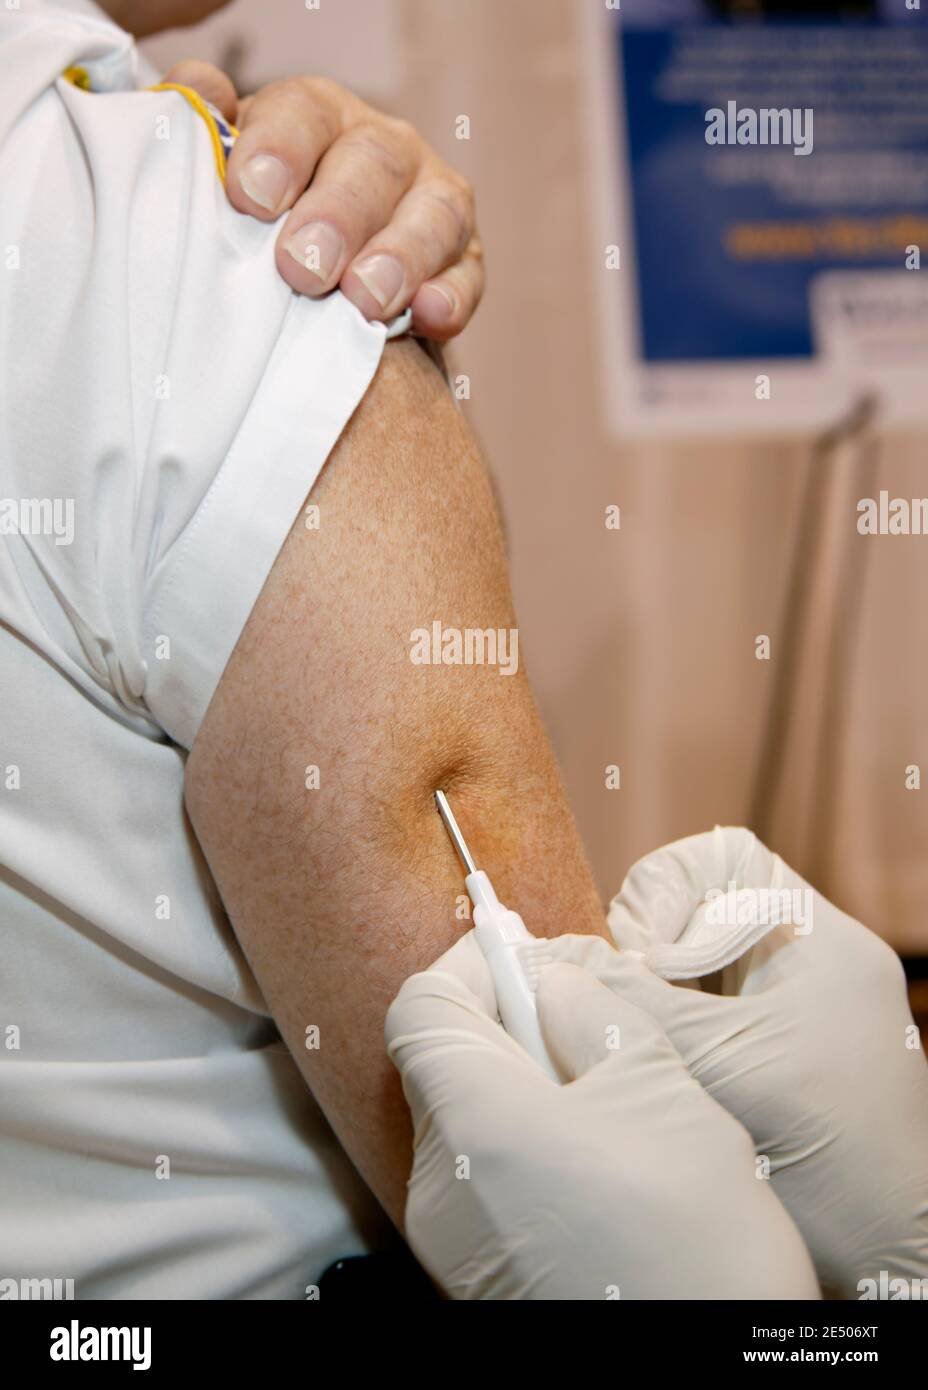 Having a medical injection Stock Photo